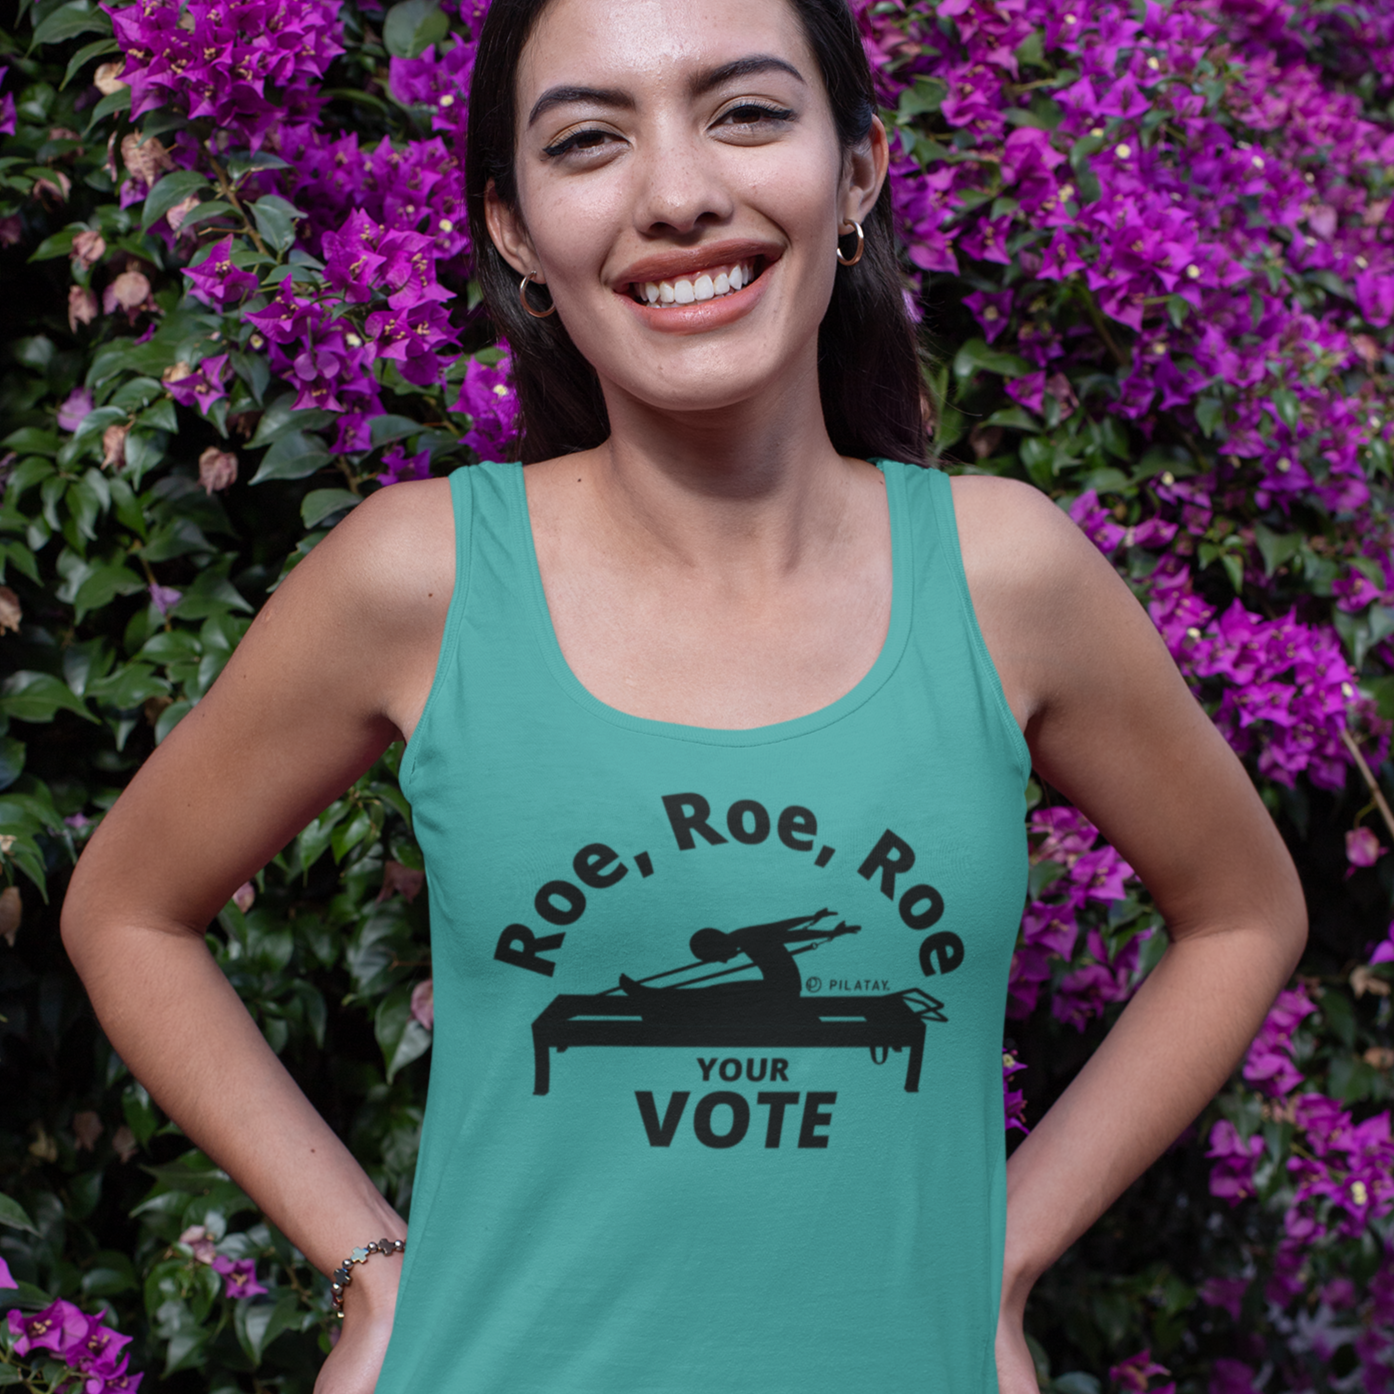 Roe Roe Roe Your Vote Pilates Tank Top - Funny Pilates Tanks and Shirts by PIlatay - Pilates Reformer Shirt 